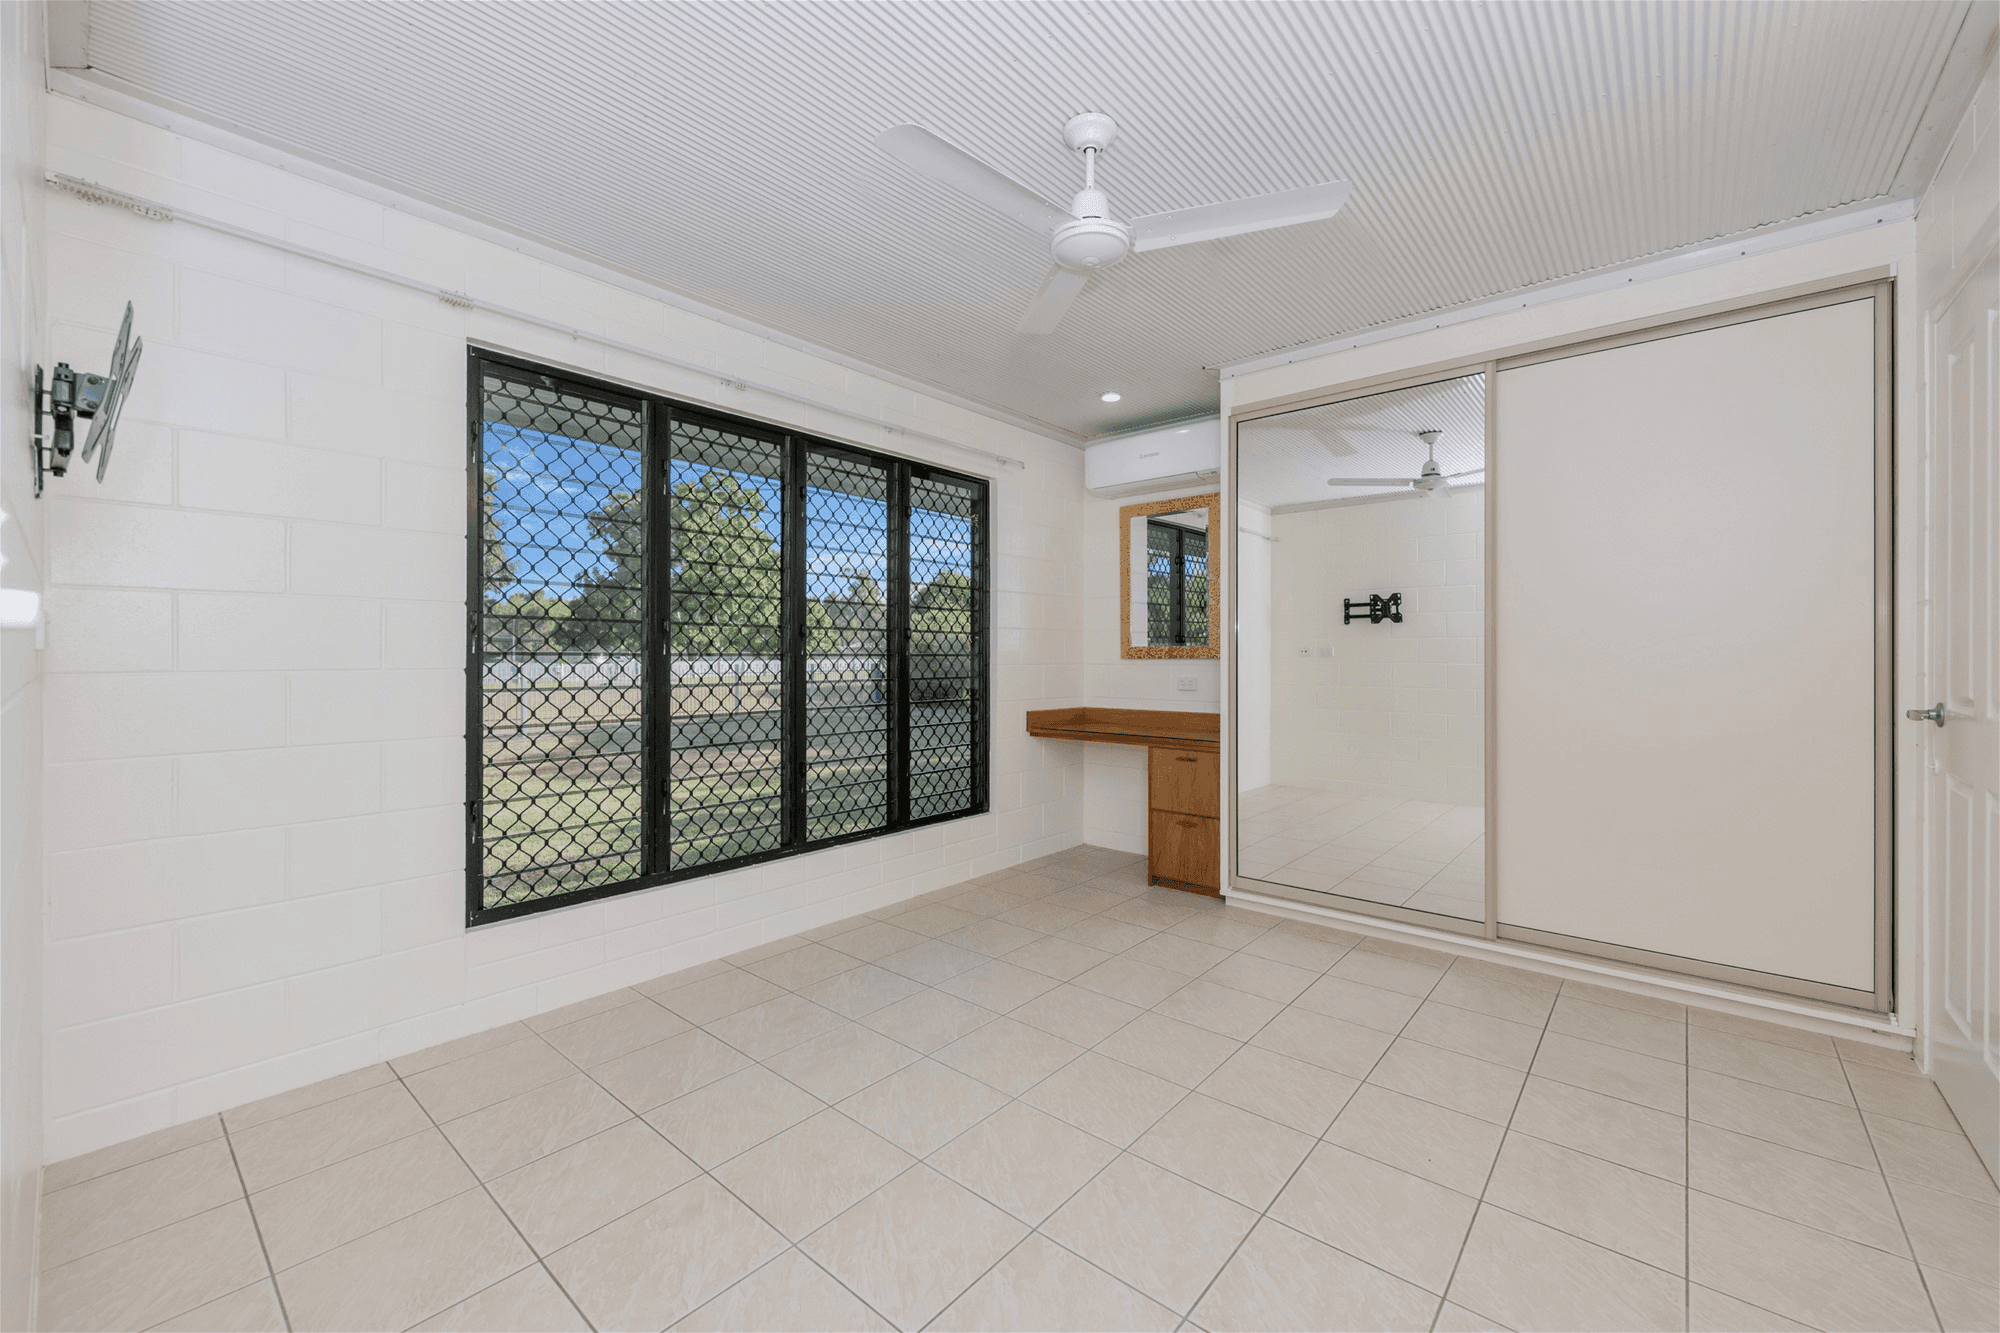 46 OCTAGONAL CRESCENT, KELSO, QLD 4815